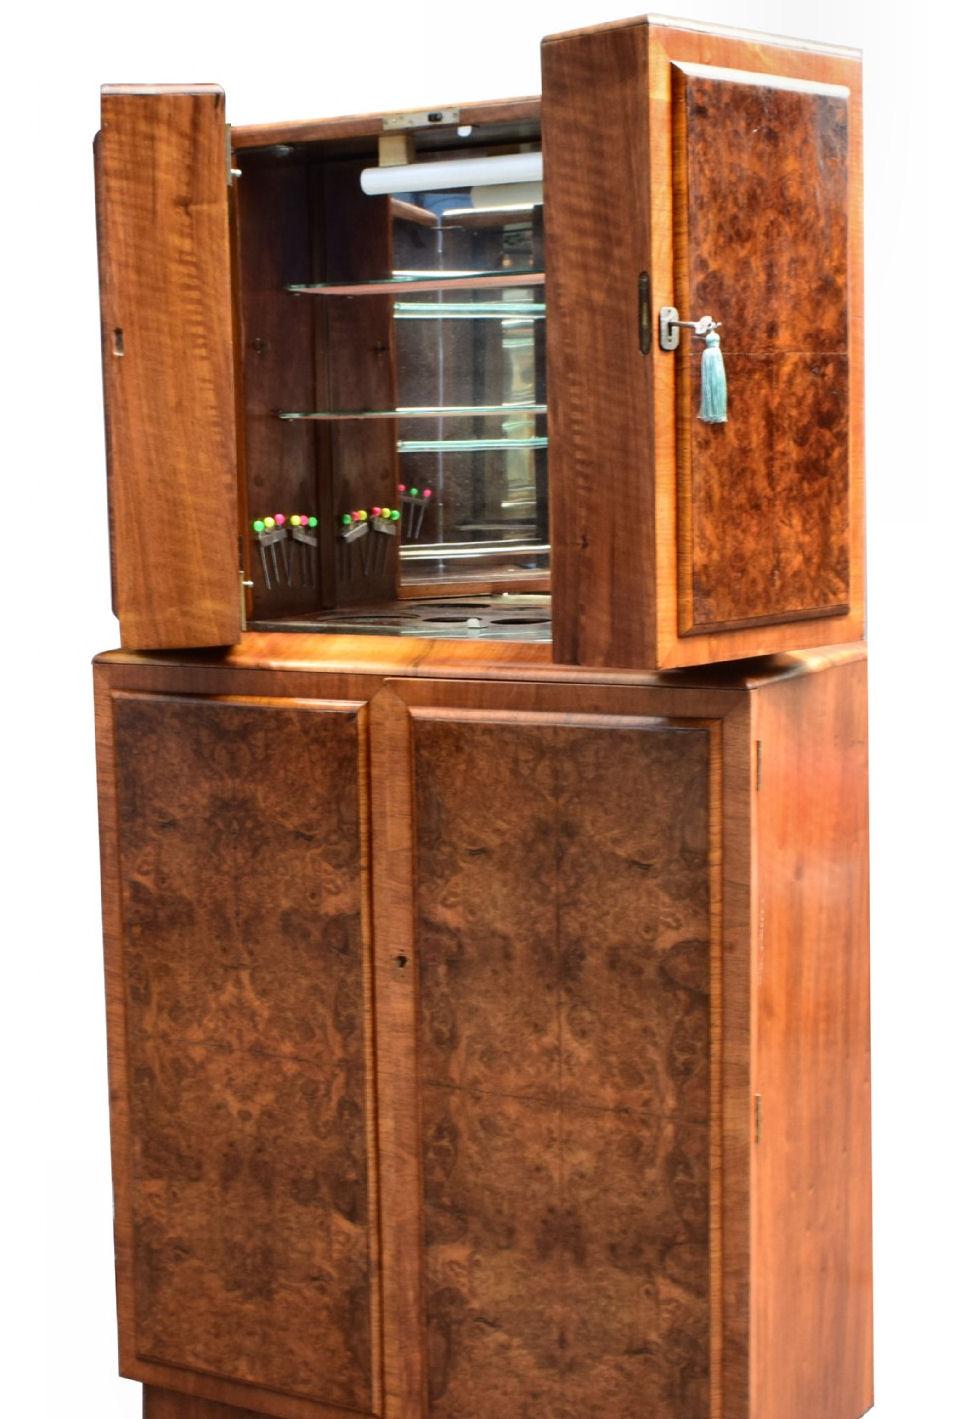 This hugely stylish cocktail cabinet is a fantastic piece of Art Deco furniture, and its internal features prove to be an incredibly appealing feature. The beautifully presented burr walnut has a superb pattern of grain. The upper doors open to